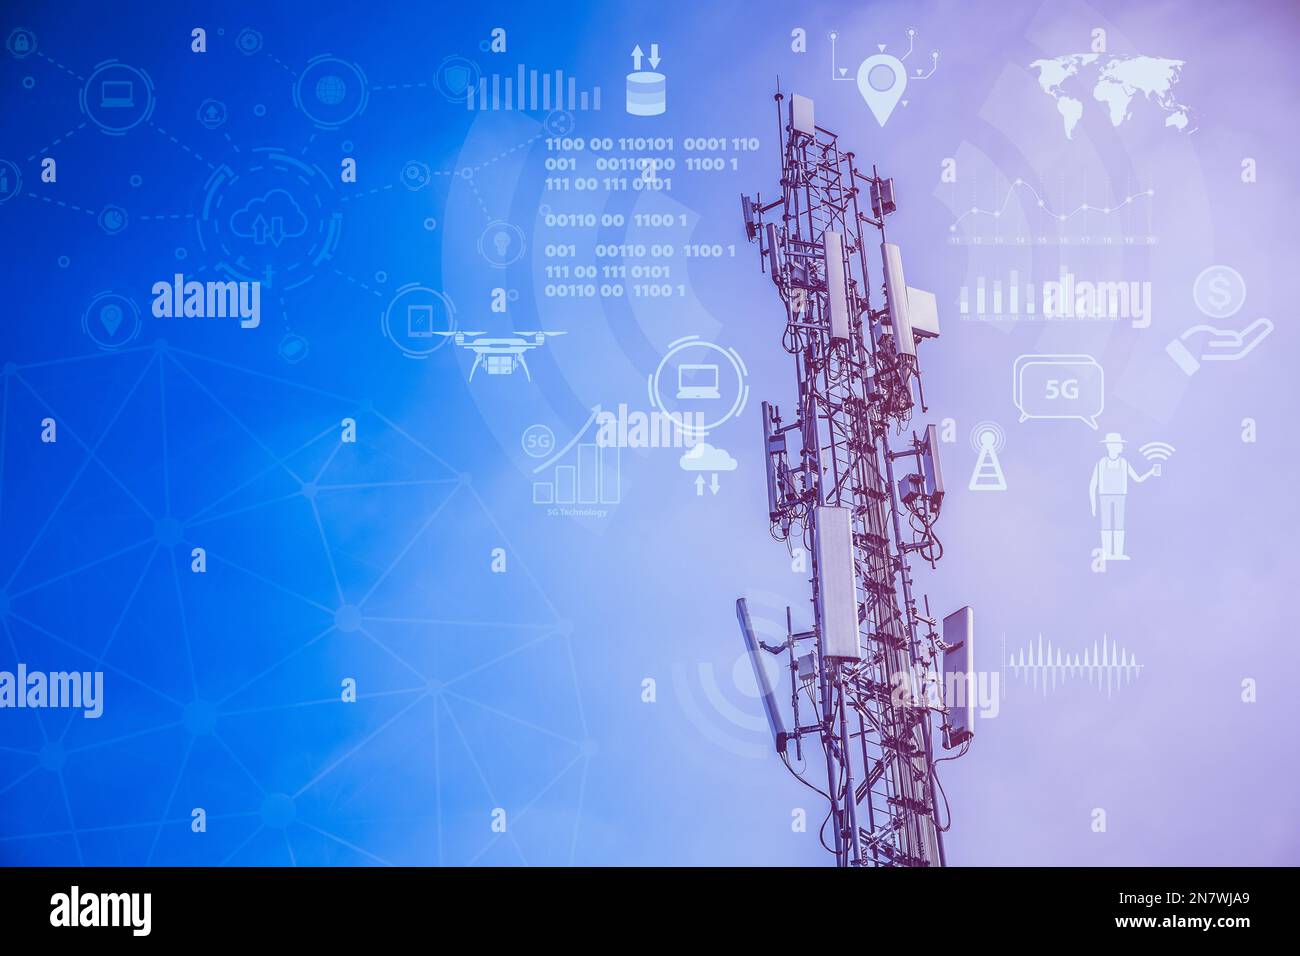 5G data communication tower overlay with illustration of business data technology application for background Stock Photo